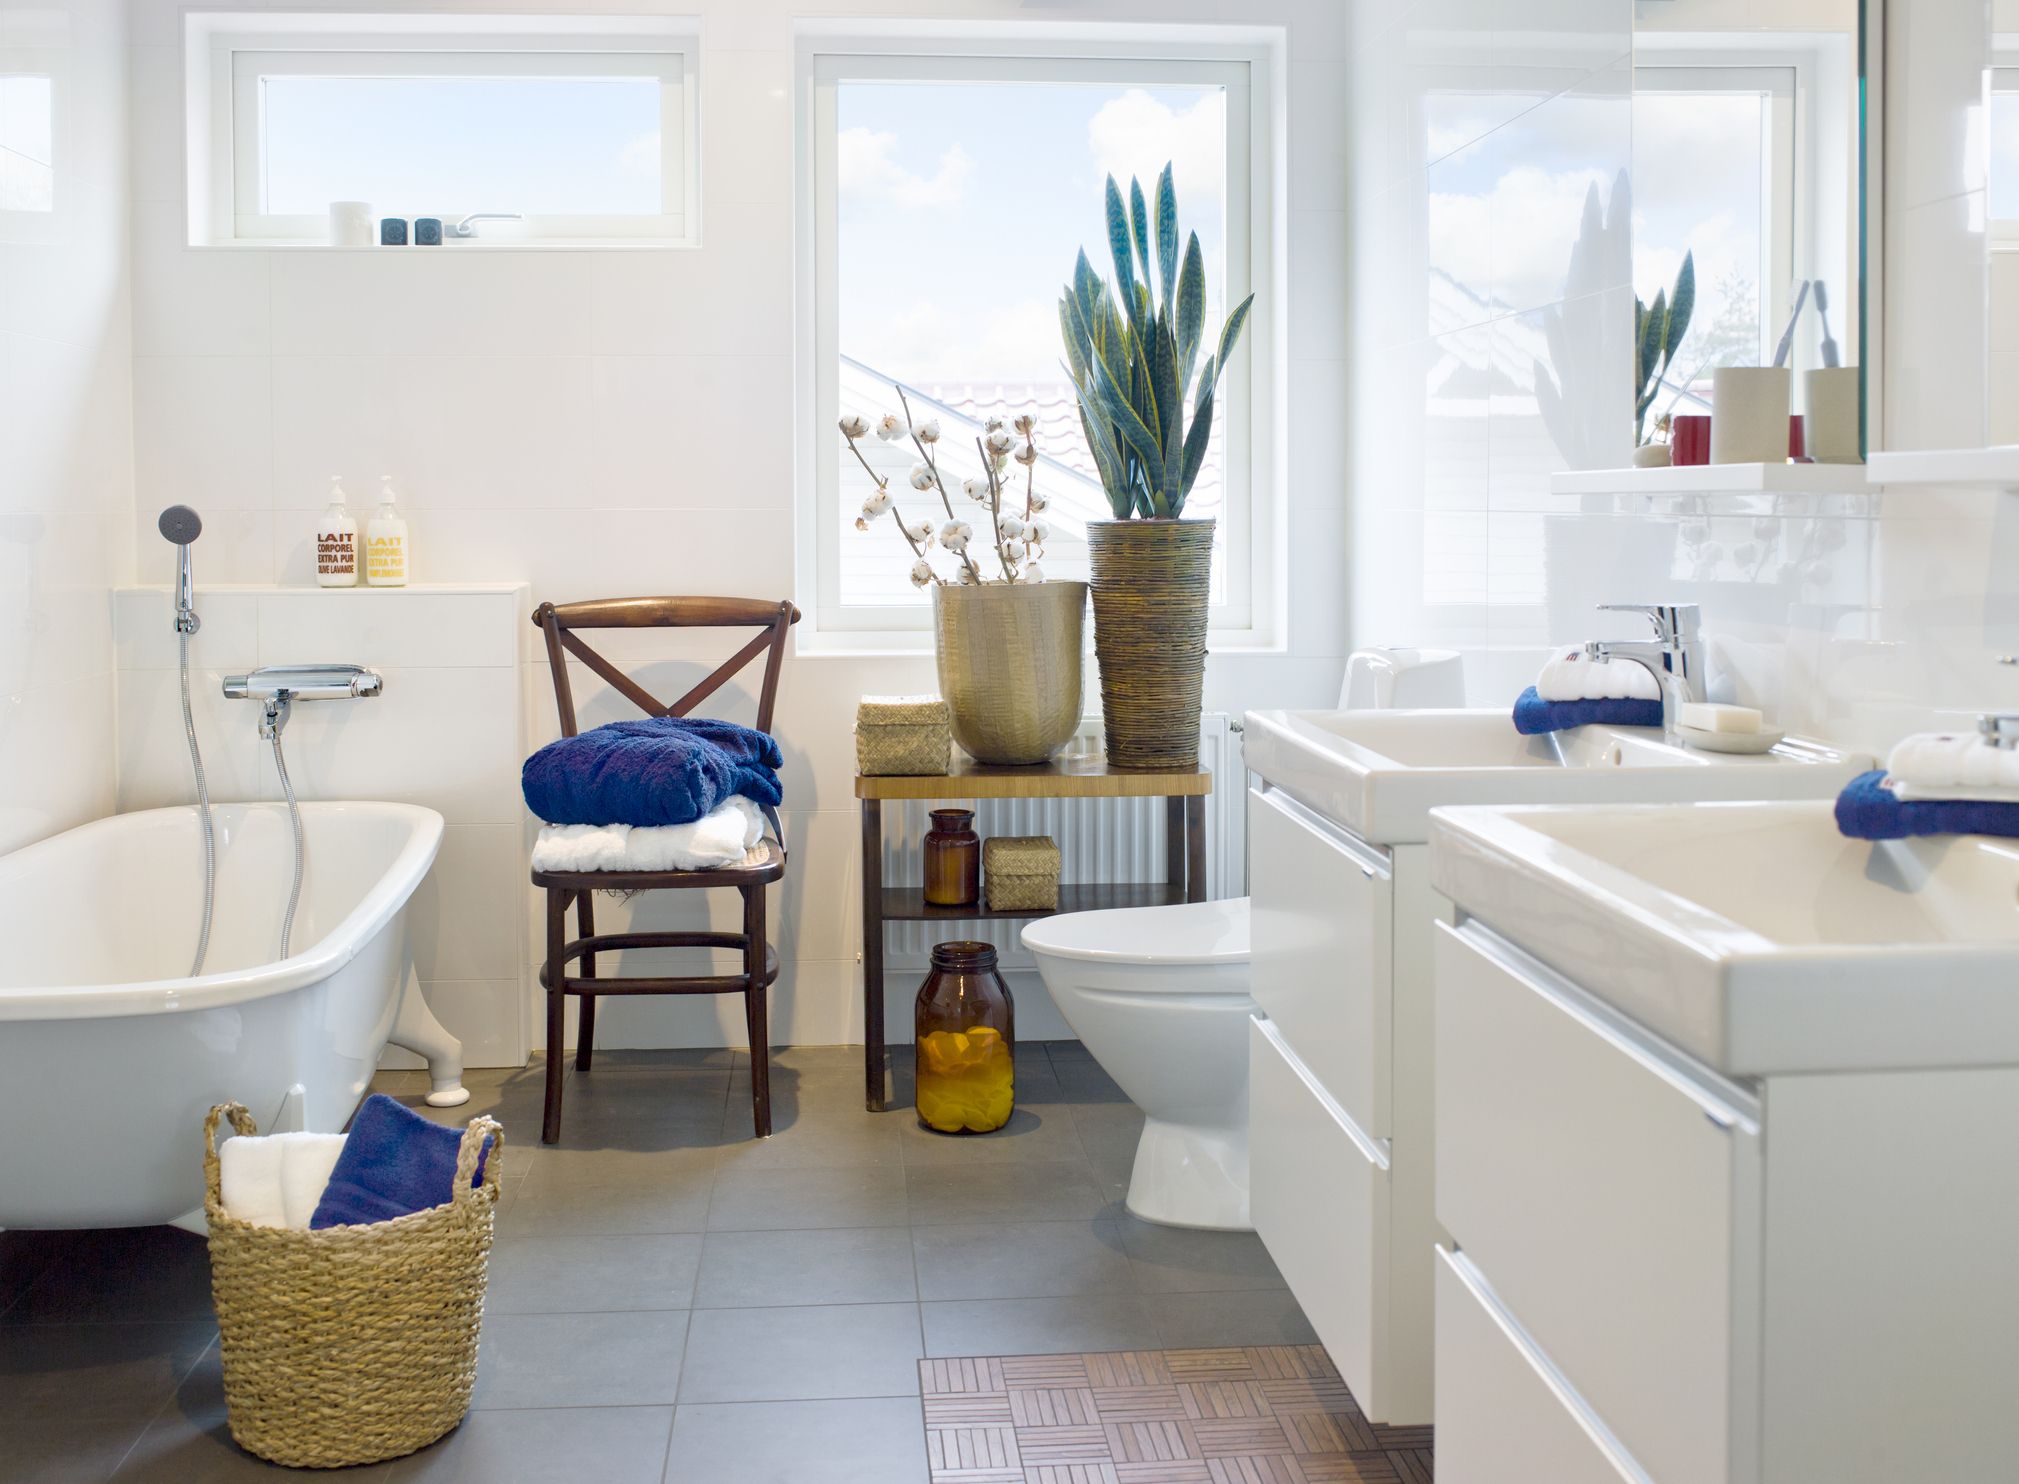 5 of the Best Bathroom Plants That Thrive in Humidity